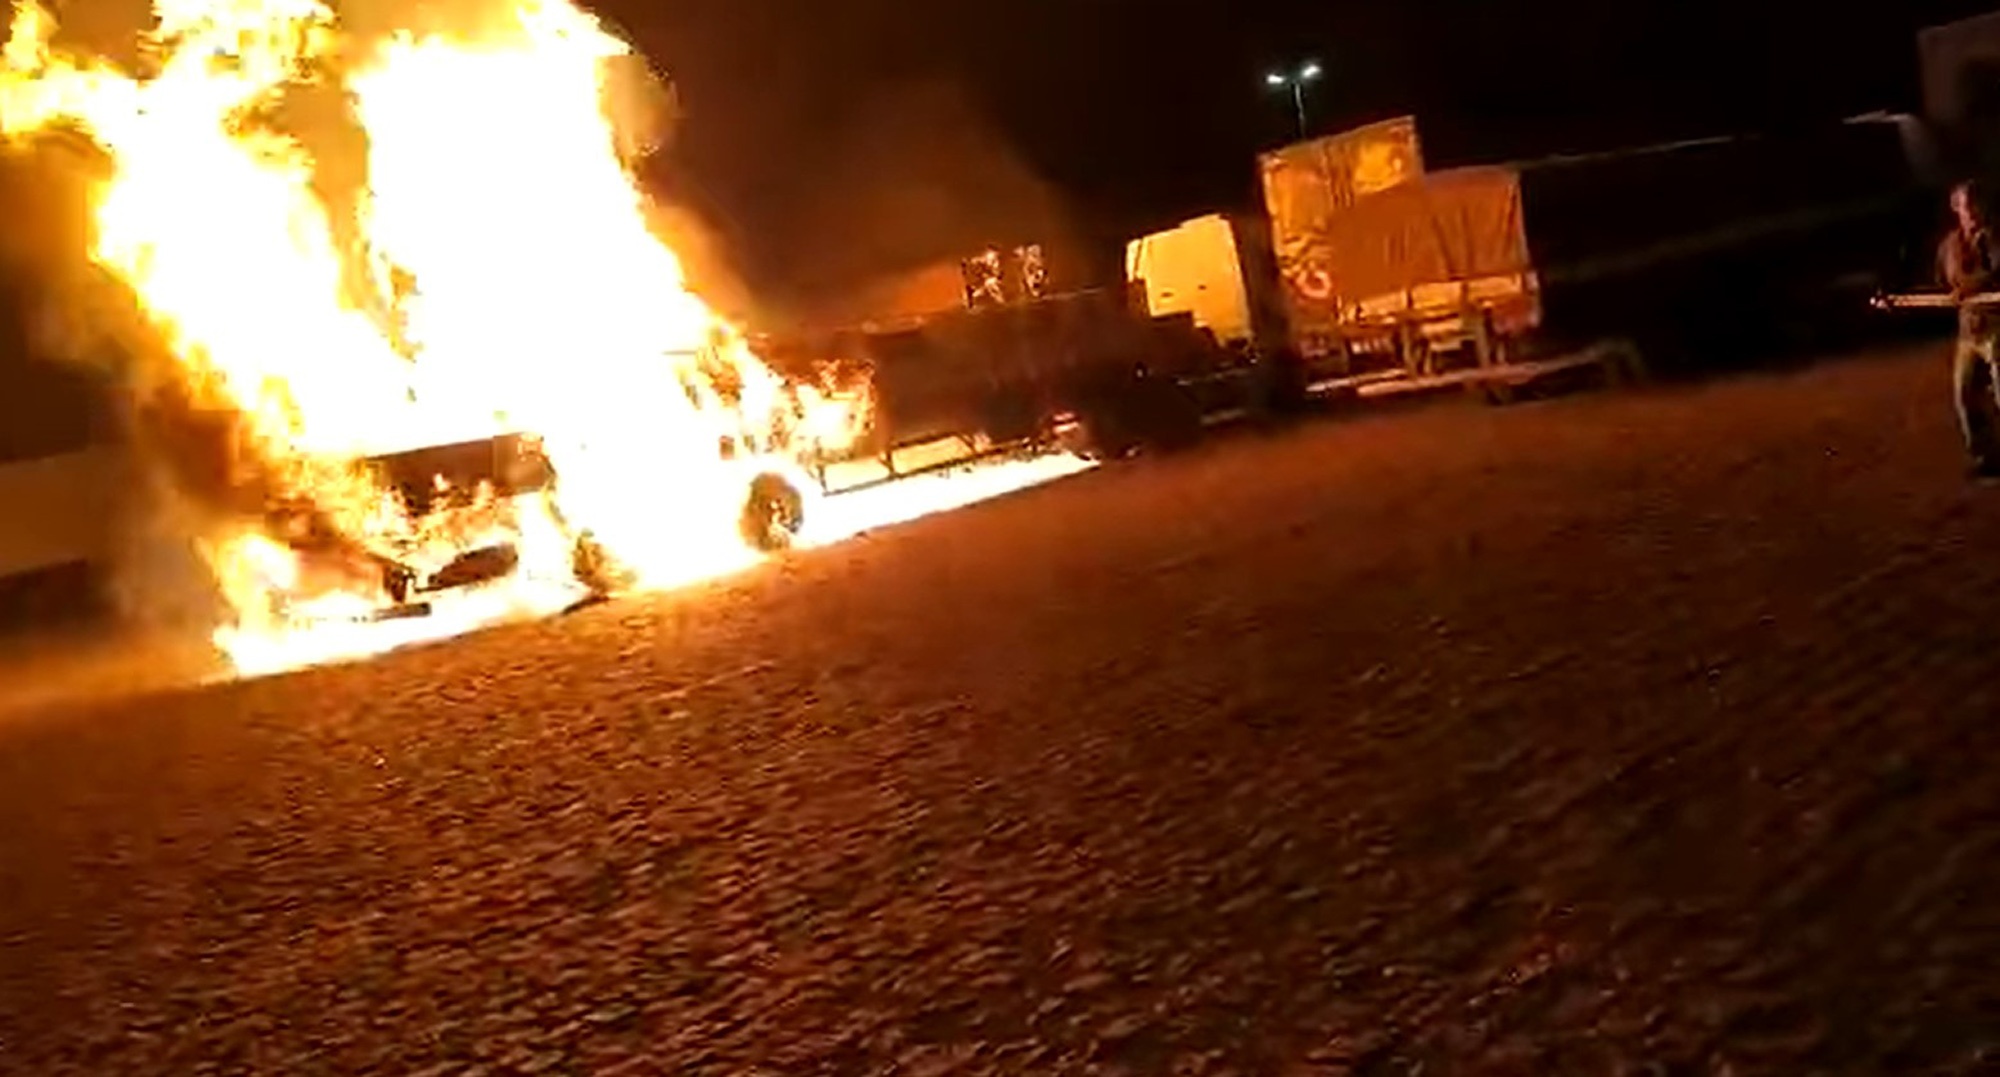 Read more about the article Moment Petrol Tanker Explodes In Giant Fireball, Injuring 15